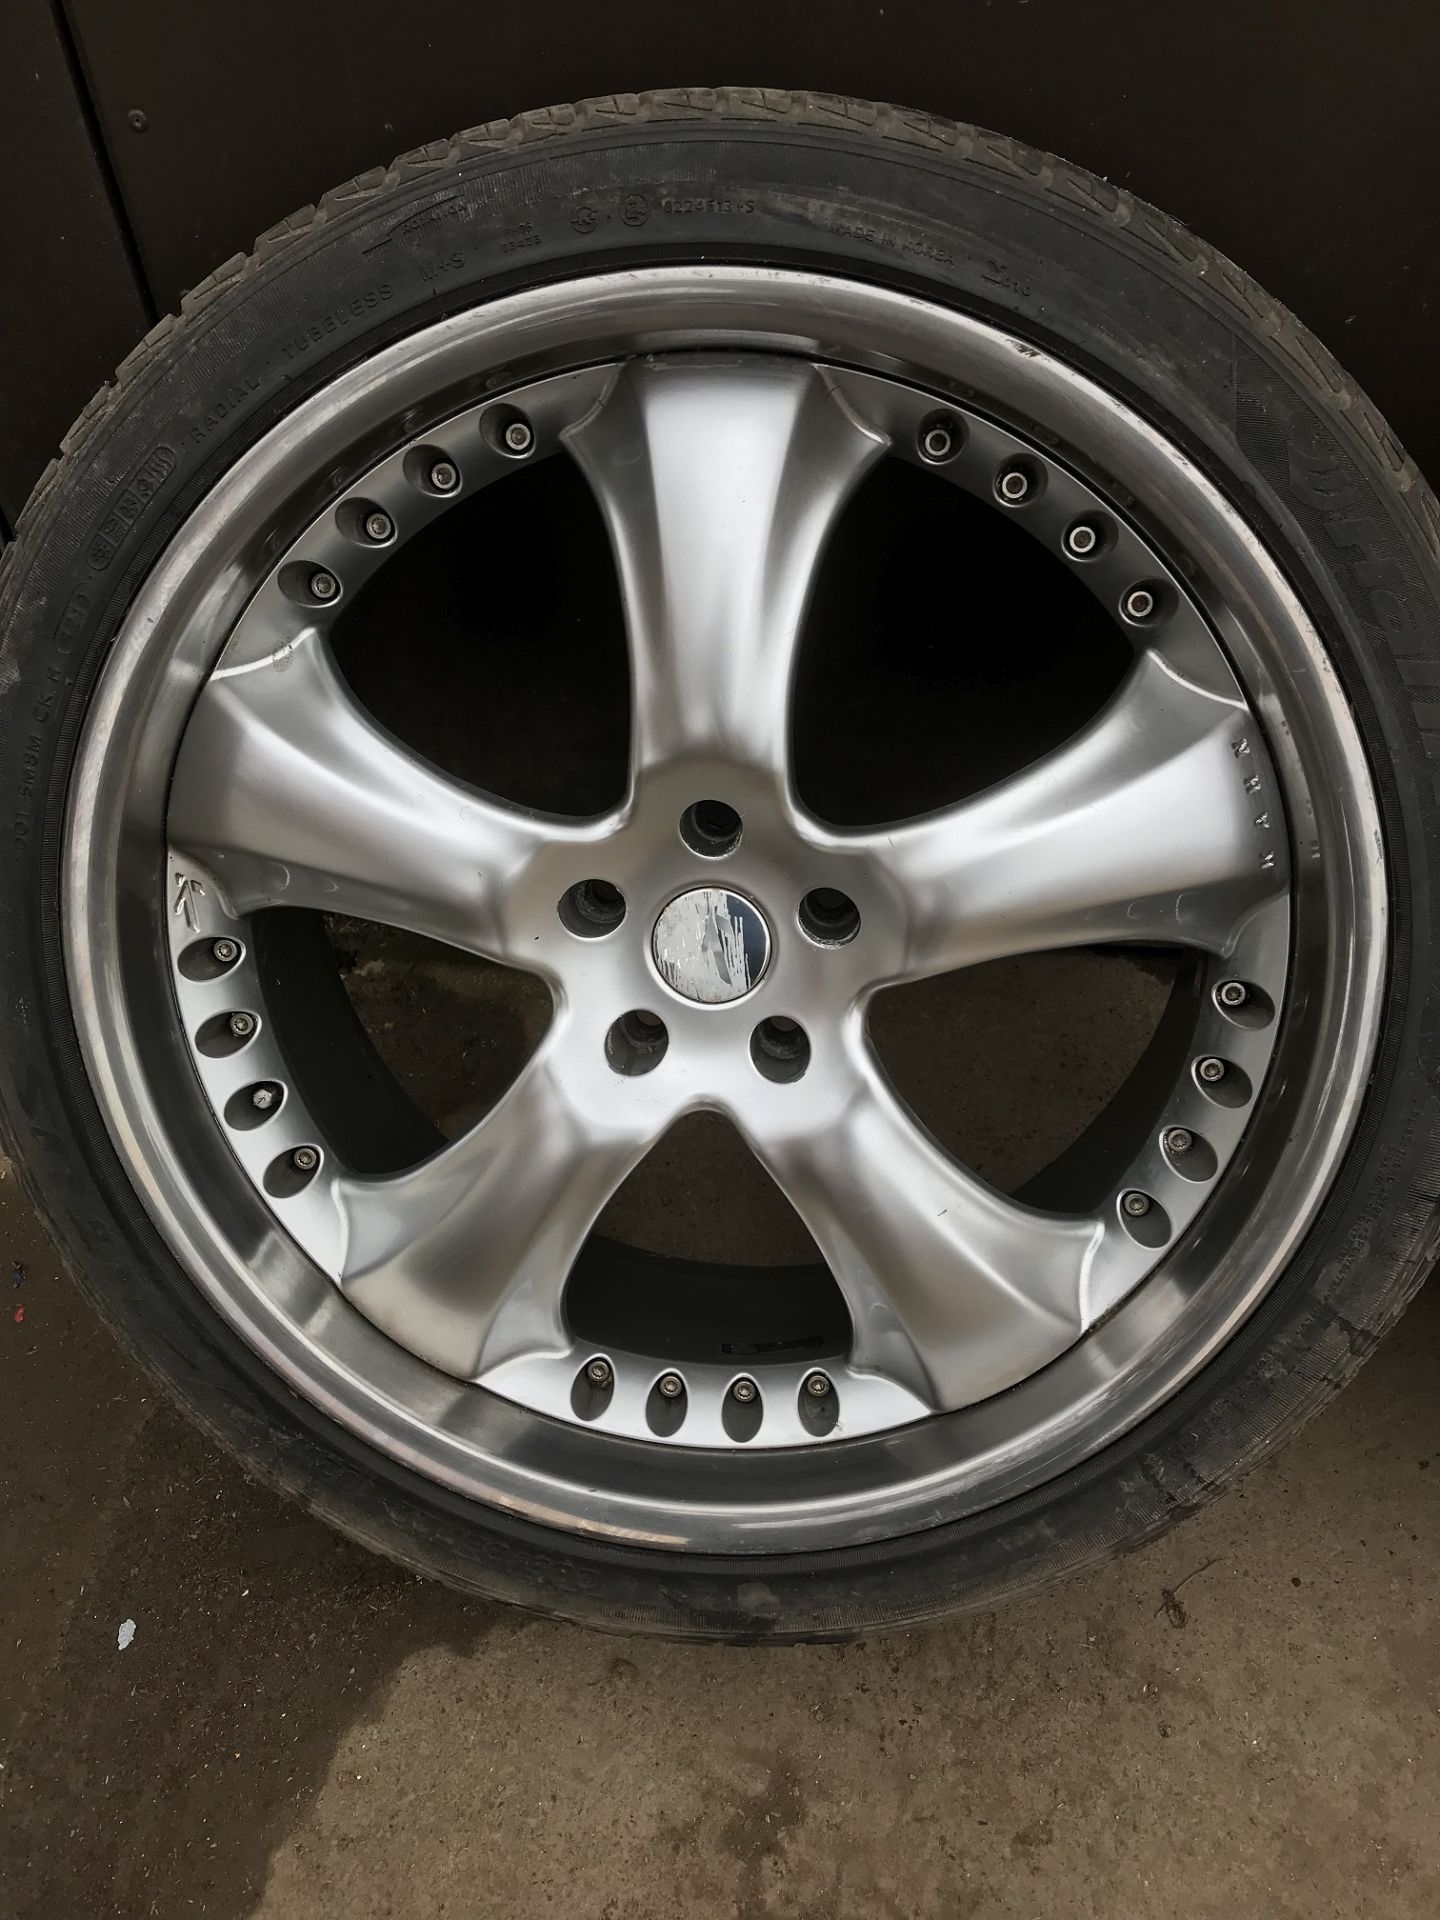 KAHN 22" ALLOY WHEELS AND TYRES. SIZE 285/35R 22 108W *PLUS VAT* - Image 2 of 5